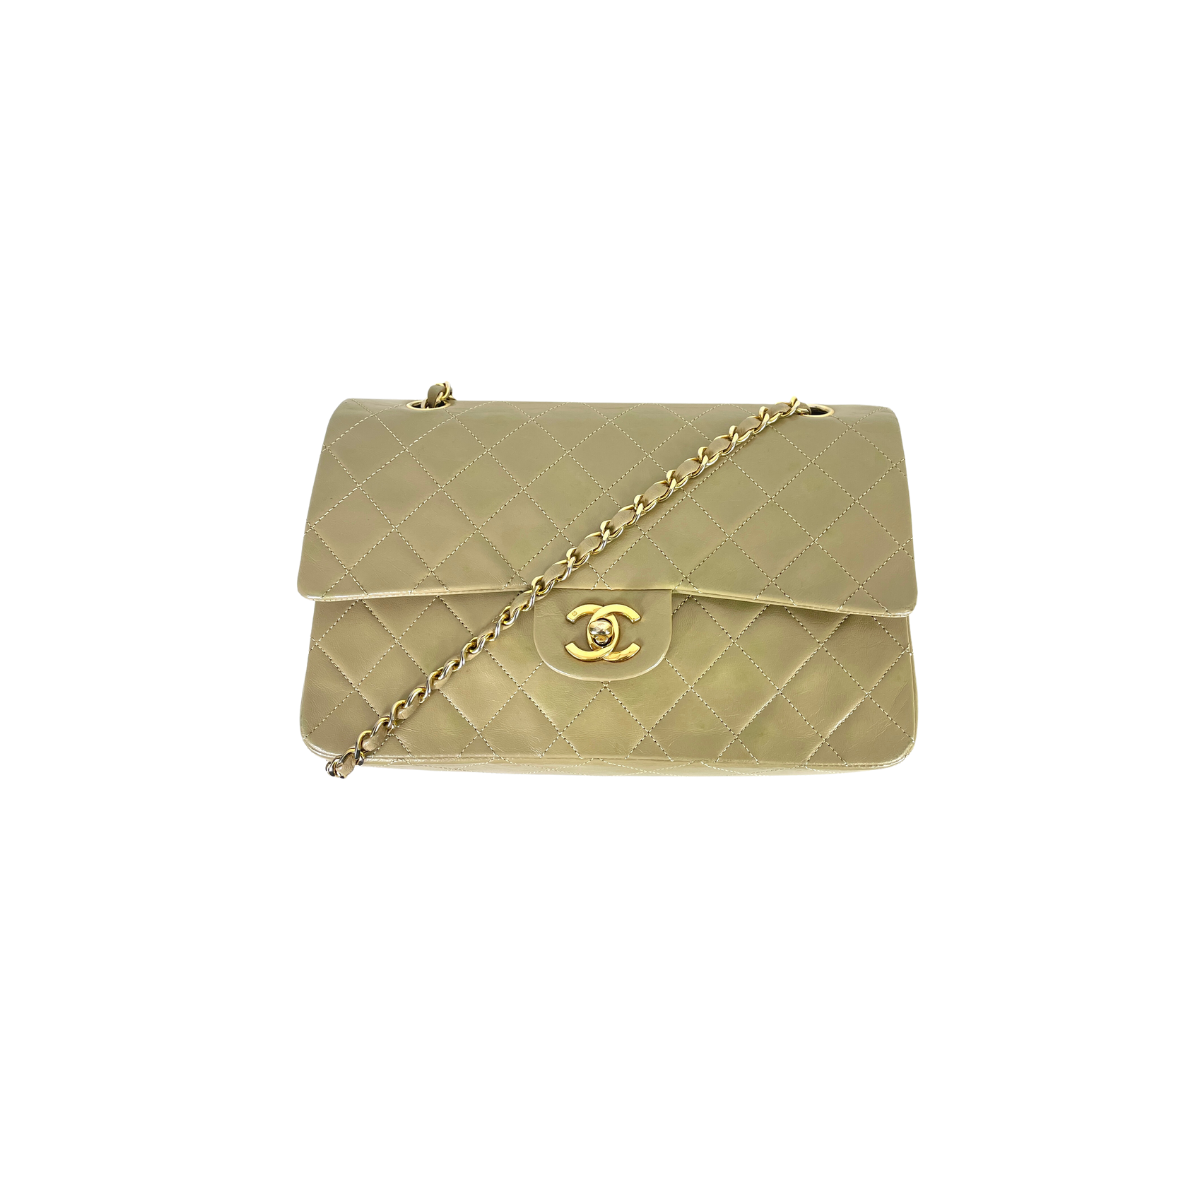 Chanel Double Flap Bag Beige - 76 For Sale on 1stDibs